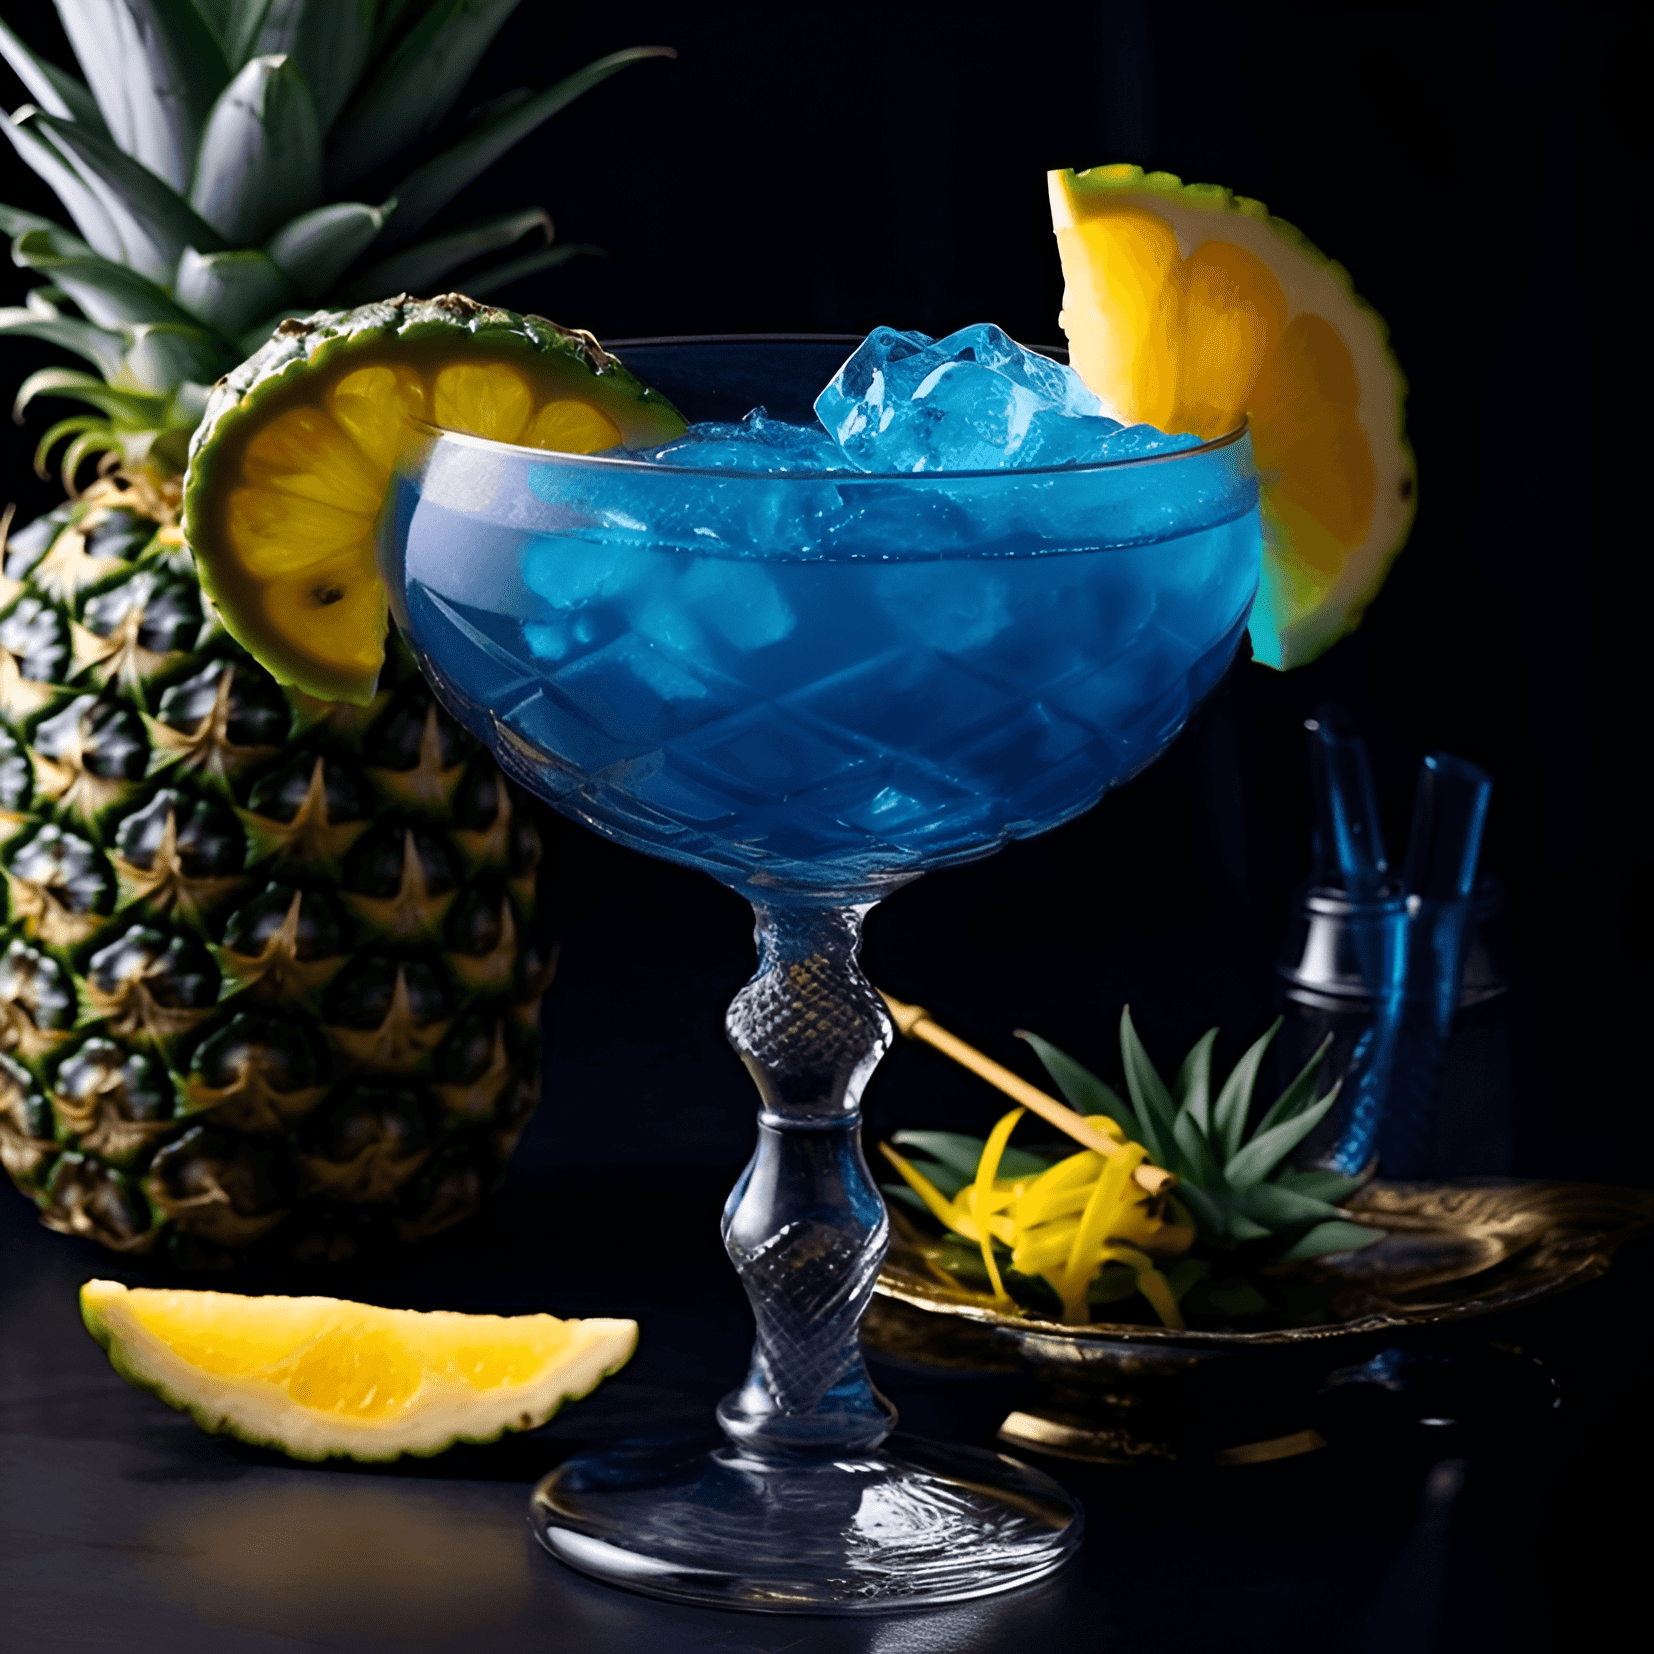 Deep Blue Sea Cocktail Recipe - The Deep Blue Sea cocktail is a delightful mix of sweet, sour, and fruity flavors. The combination of citrus and tropical fruit notes creates a refreshing and invigorating taste, while the blue curaçao adds a touch of sweetness and a vibrant blue hue. The drink is well-balanced, with a slight tanginess from the lemon juice and a smooth, velvety texture from the coconut cream.